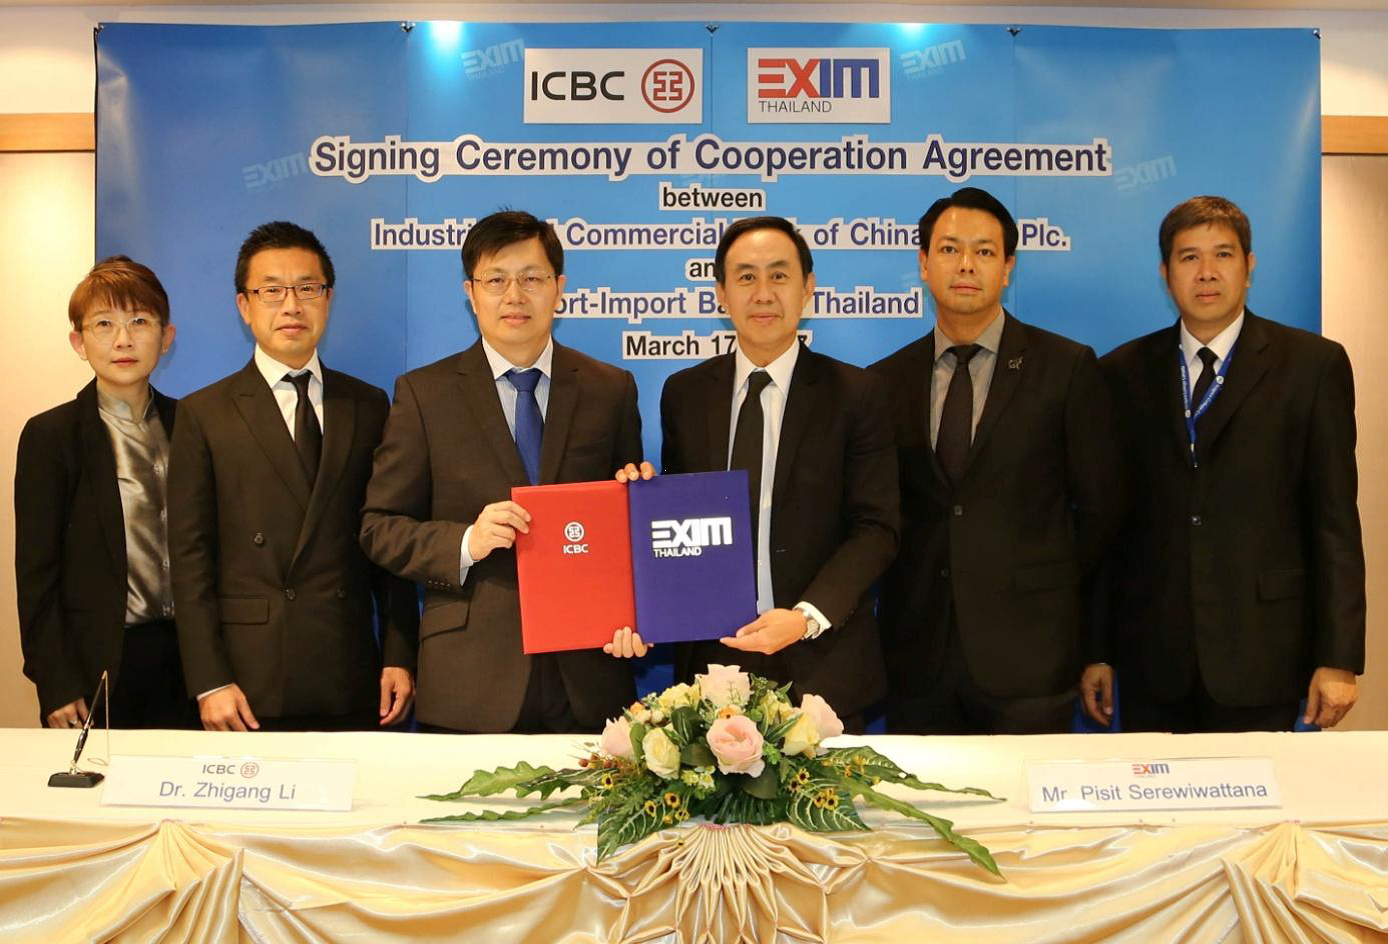 EXIM Thailand Joins Hand with ICBC (Thai) to Promote International Trade and Investment